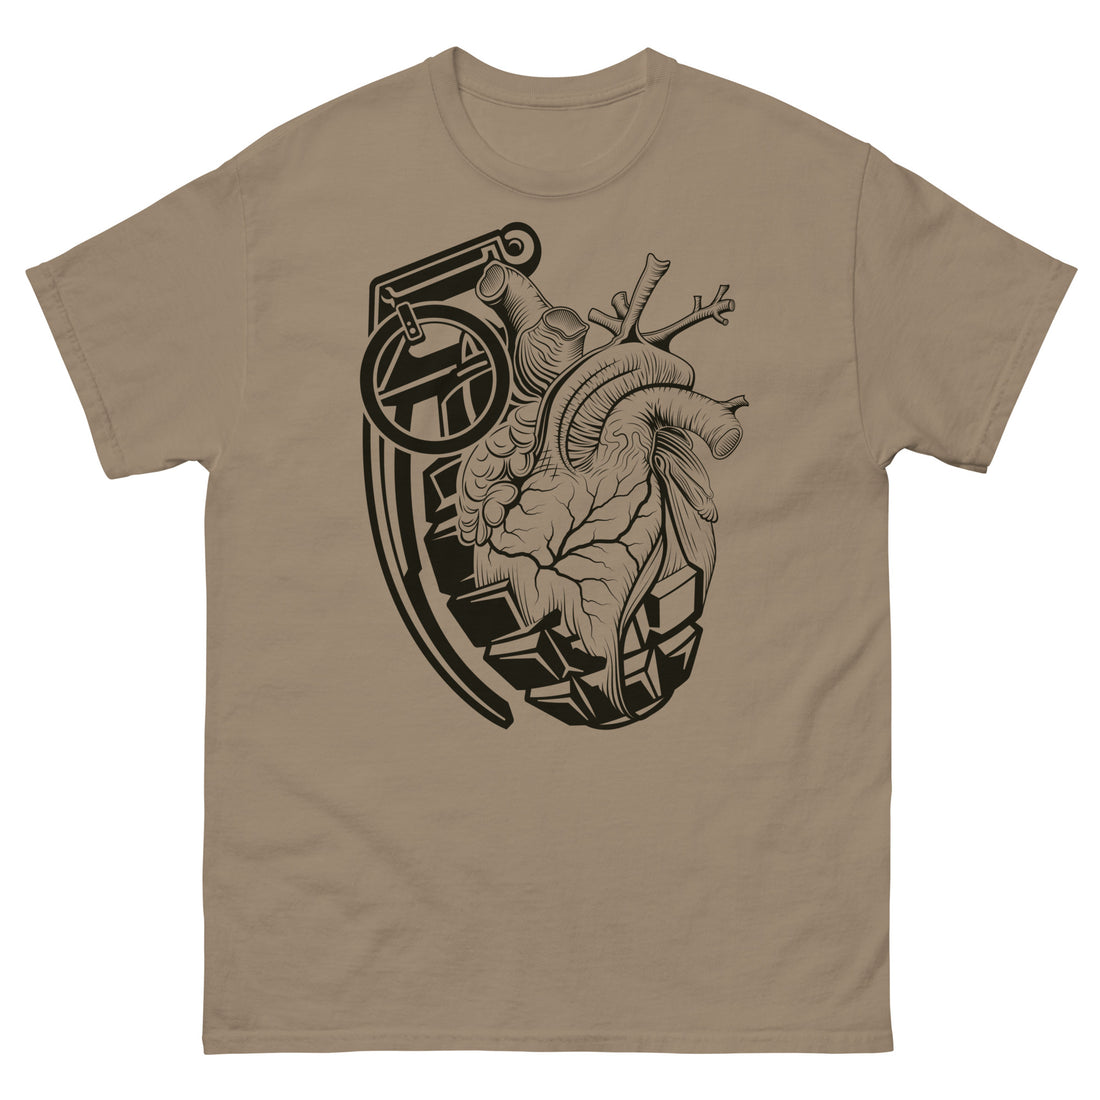 A brown t-shirt with a black grenade of sold color and line work morphing into an anatomical heart drawn using line work and hatching for shading at the top right of the image.